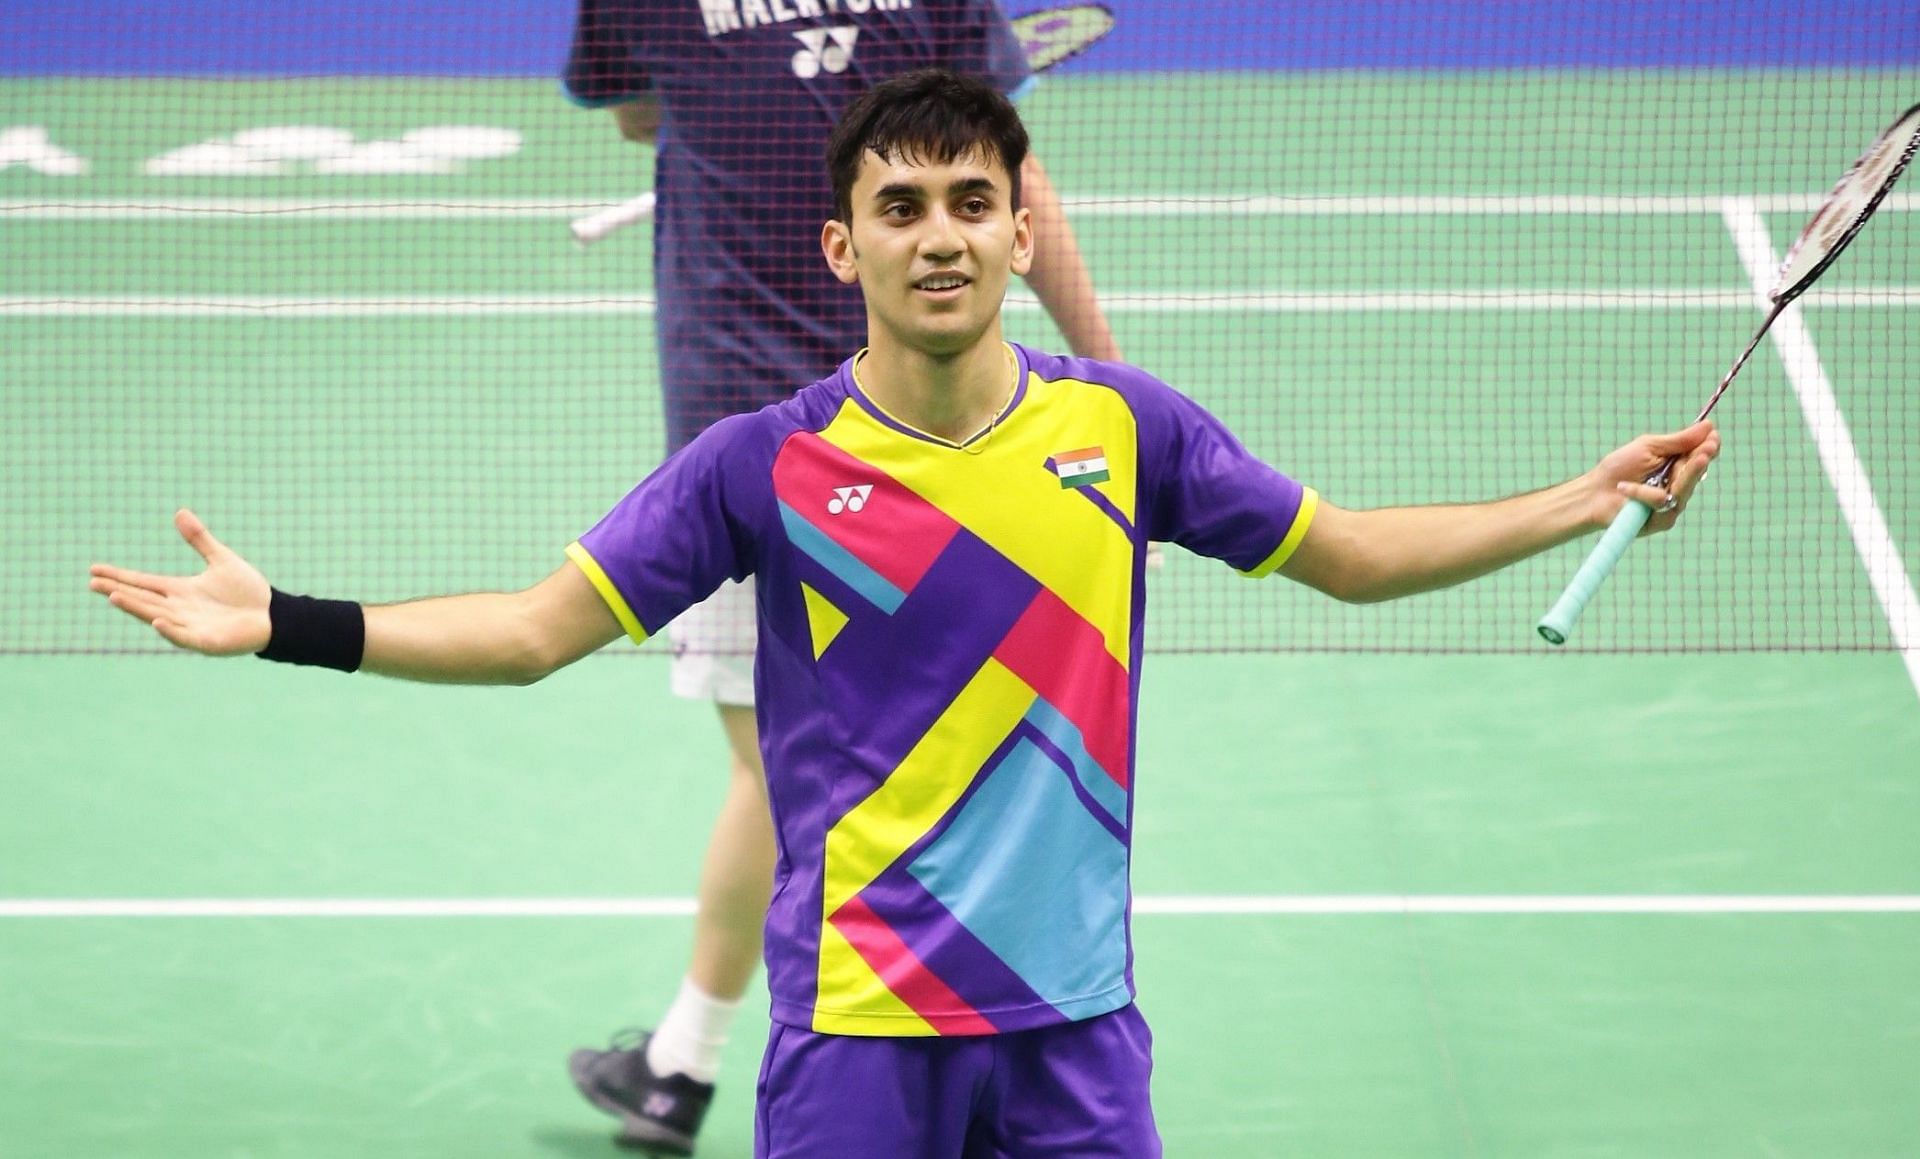 Lakshya Sen beat Loh Kean Yew 21-18, 21-15 to guide India to 3-0 win over Singapore in their mixed team badminton championship semi-final in Birmingham on Monday. (Pic credit: BAI)